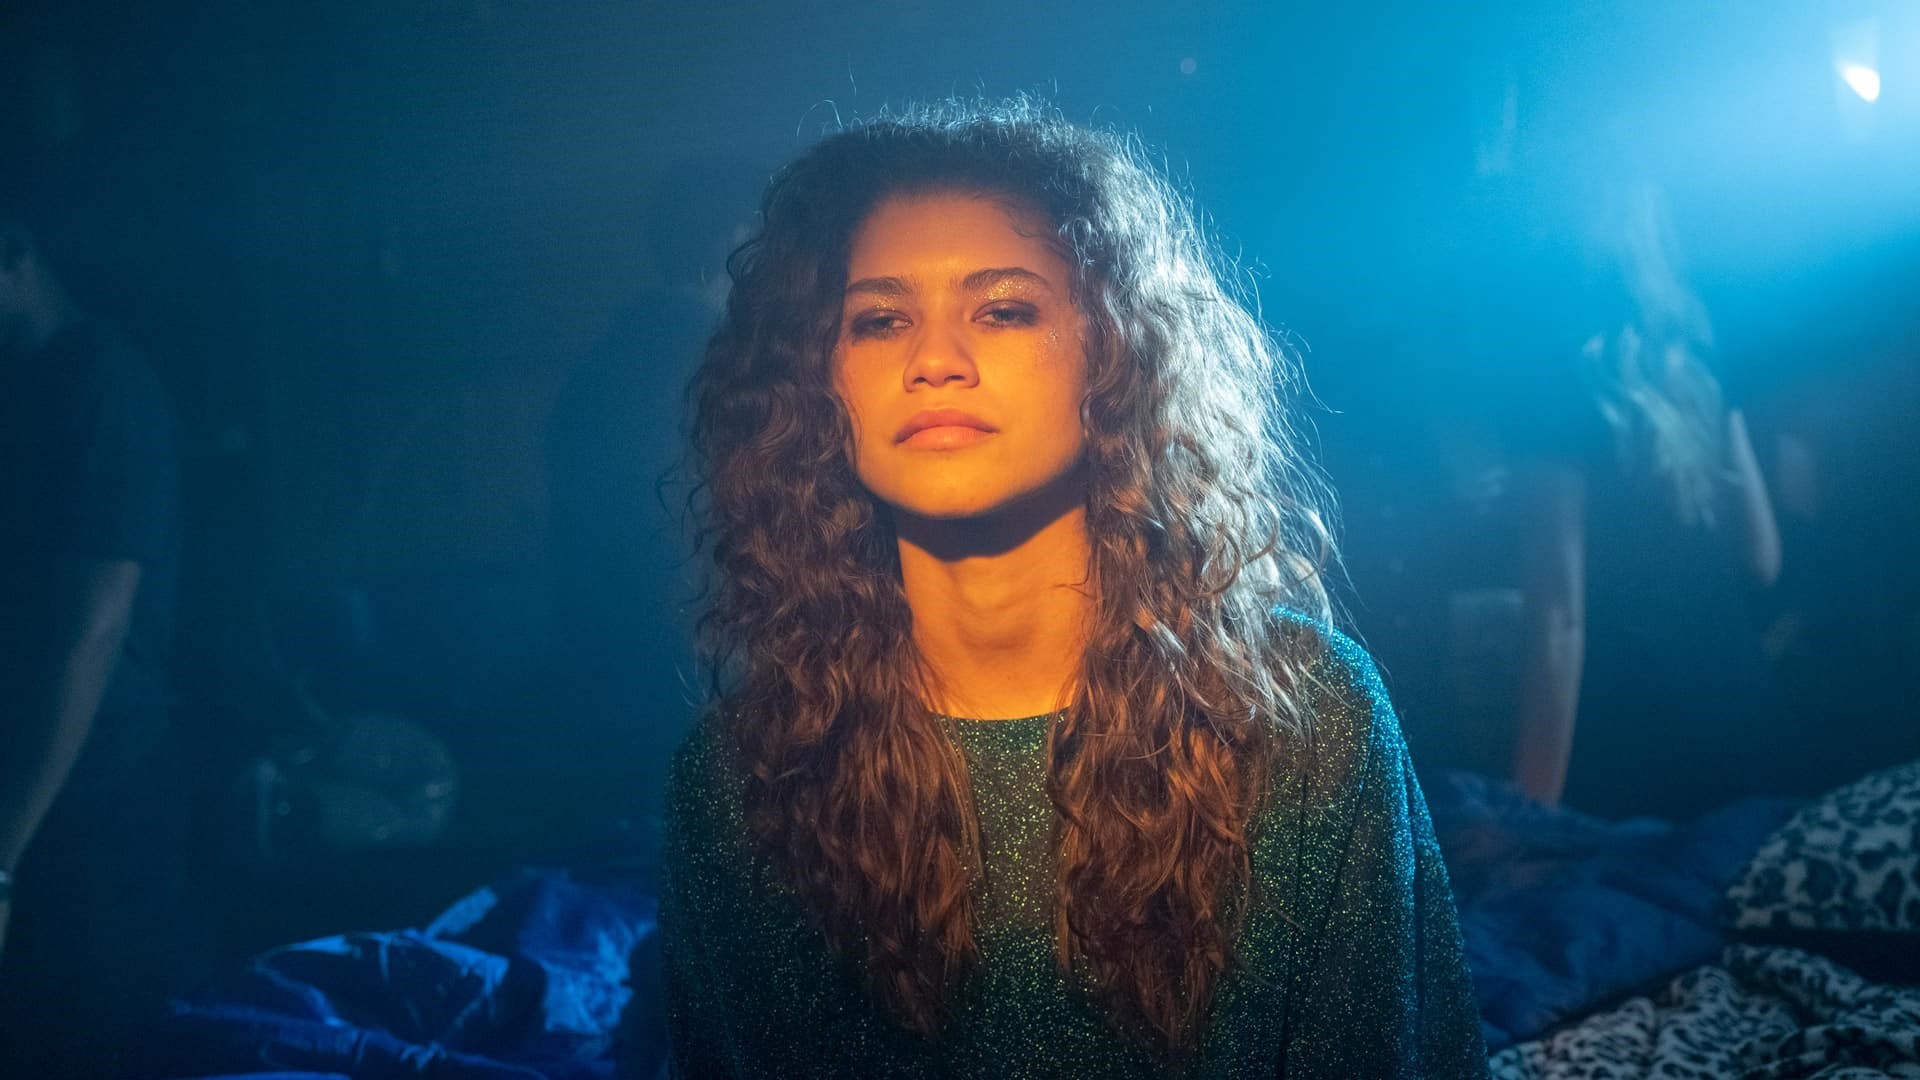 DiscussingFilm on X: A brief new look at Zendaya in 'EUPHORIA